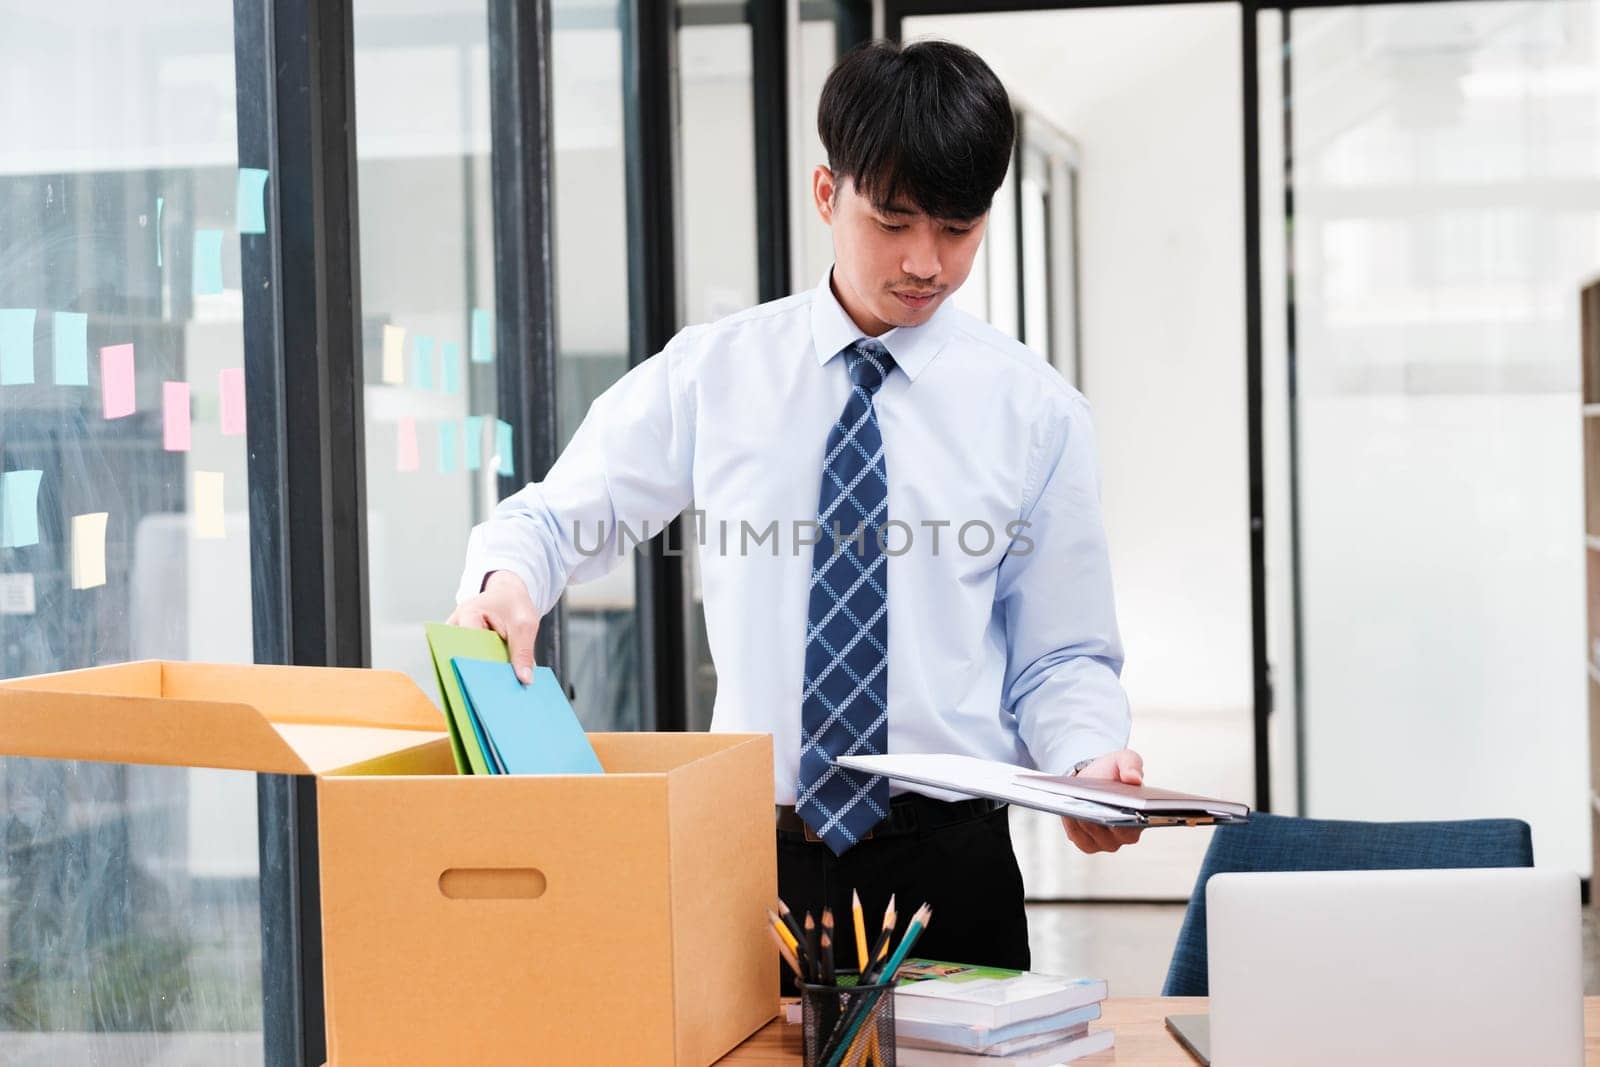 A man in a suit is opening a cardboard box on a desk. The box contains papers and a laptop